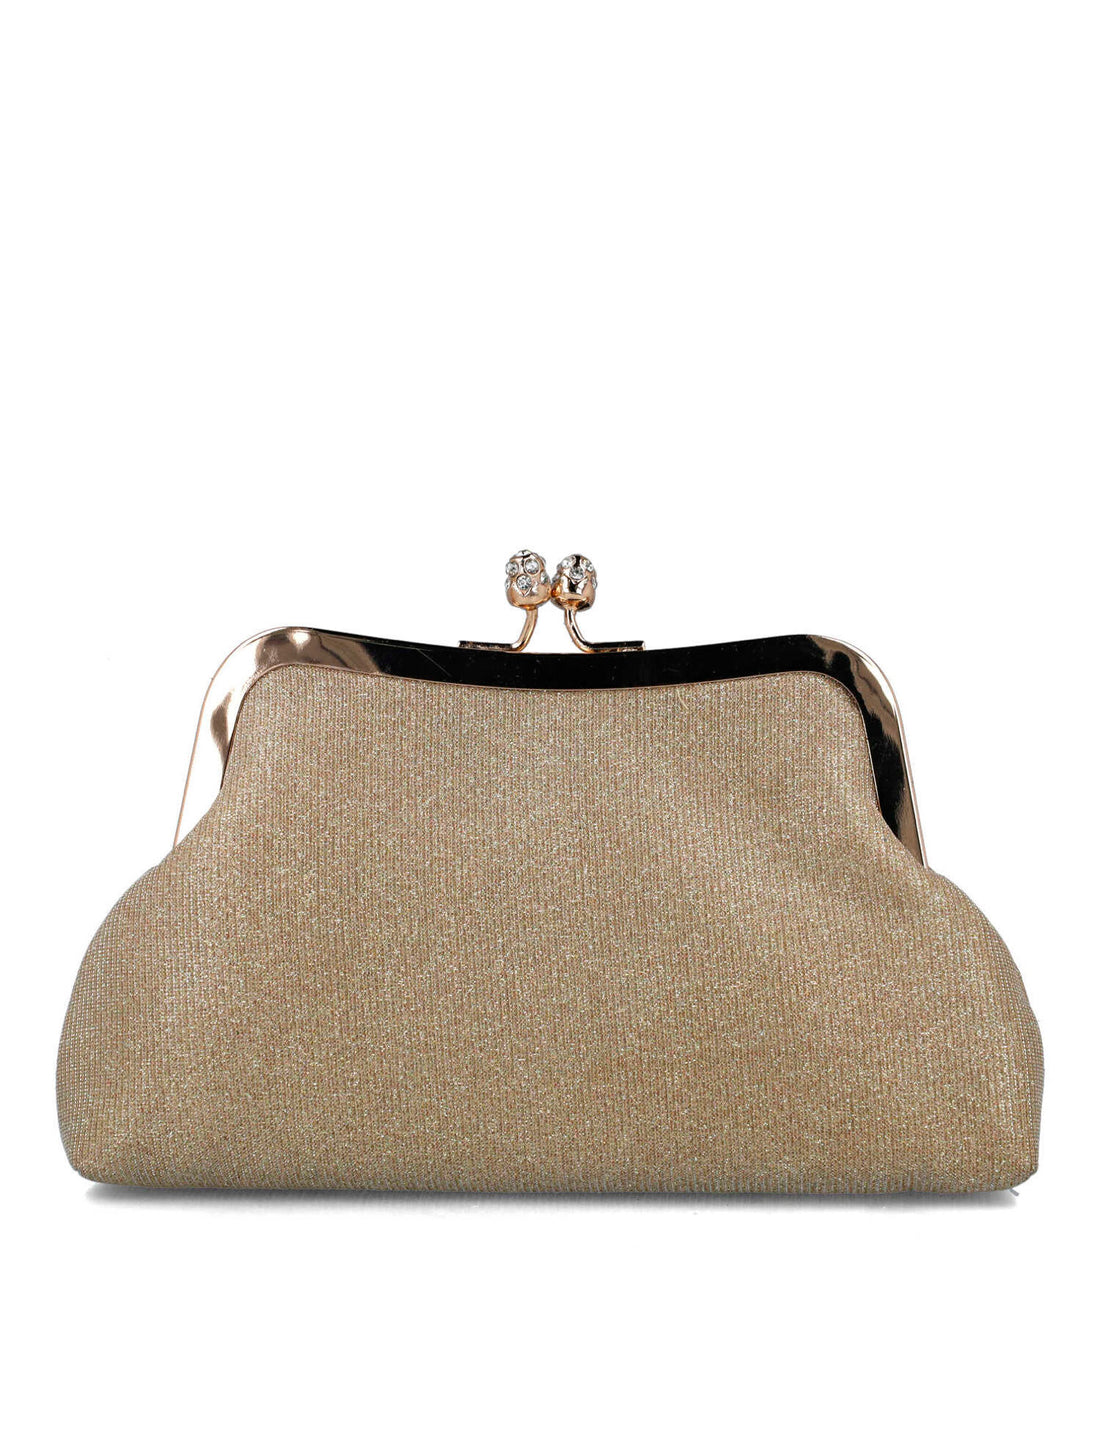 Pouch Style Clutch_85630_00_01